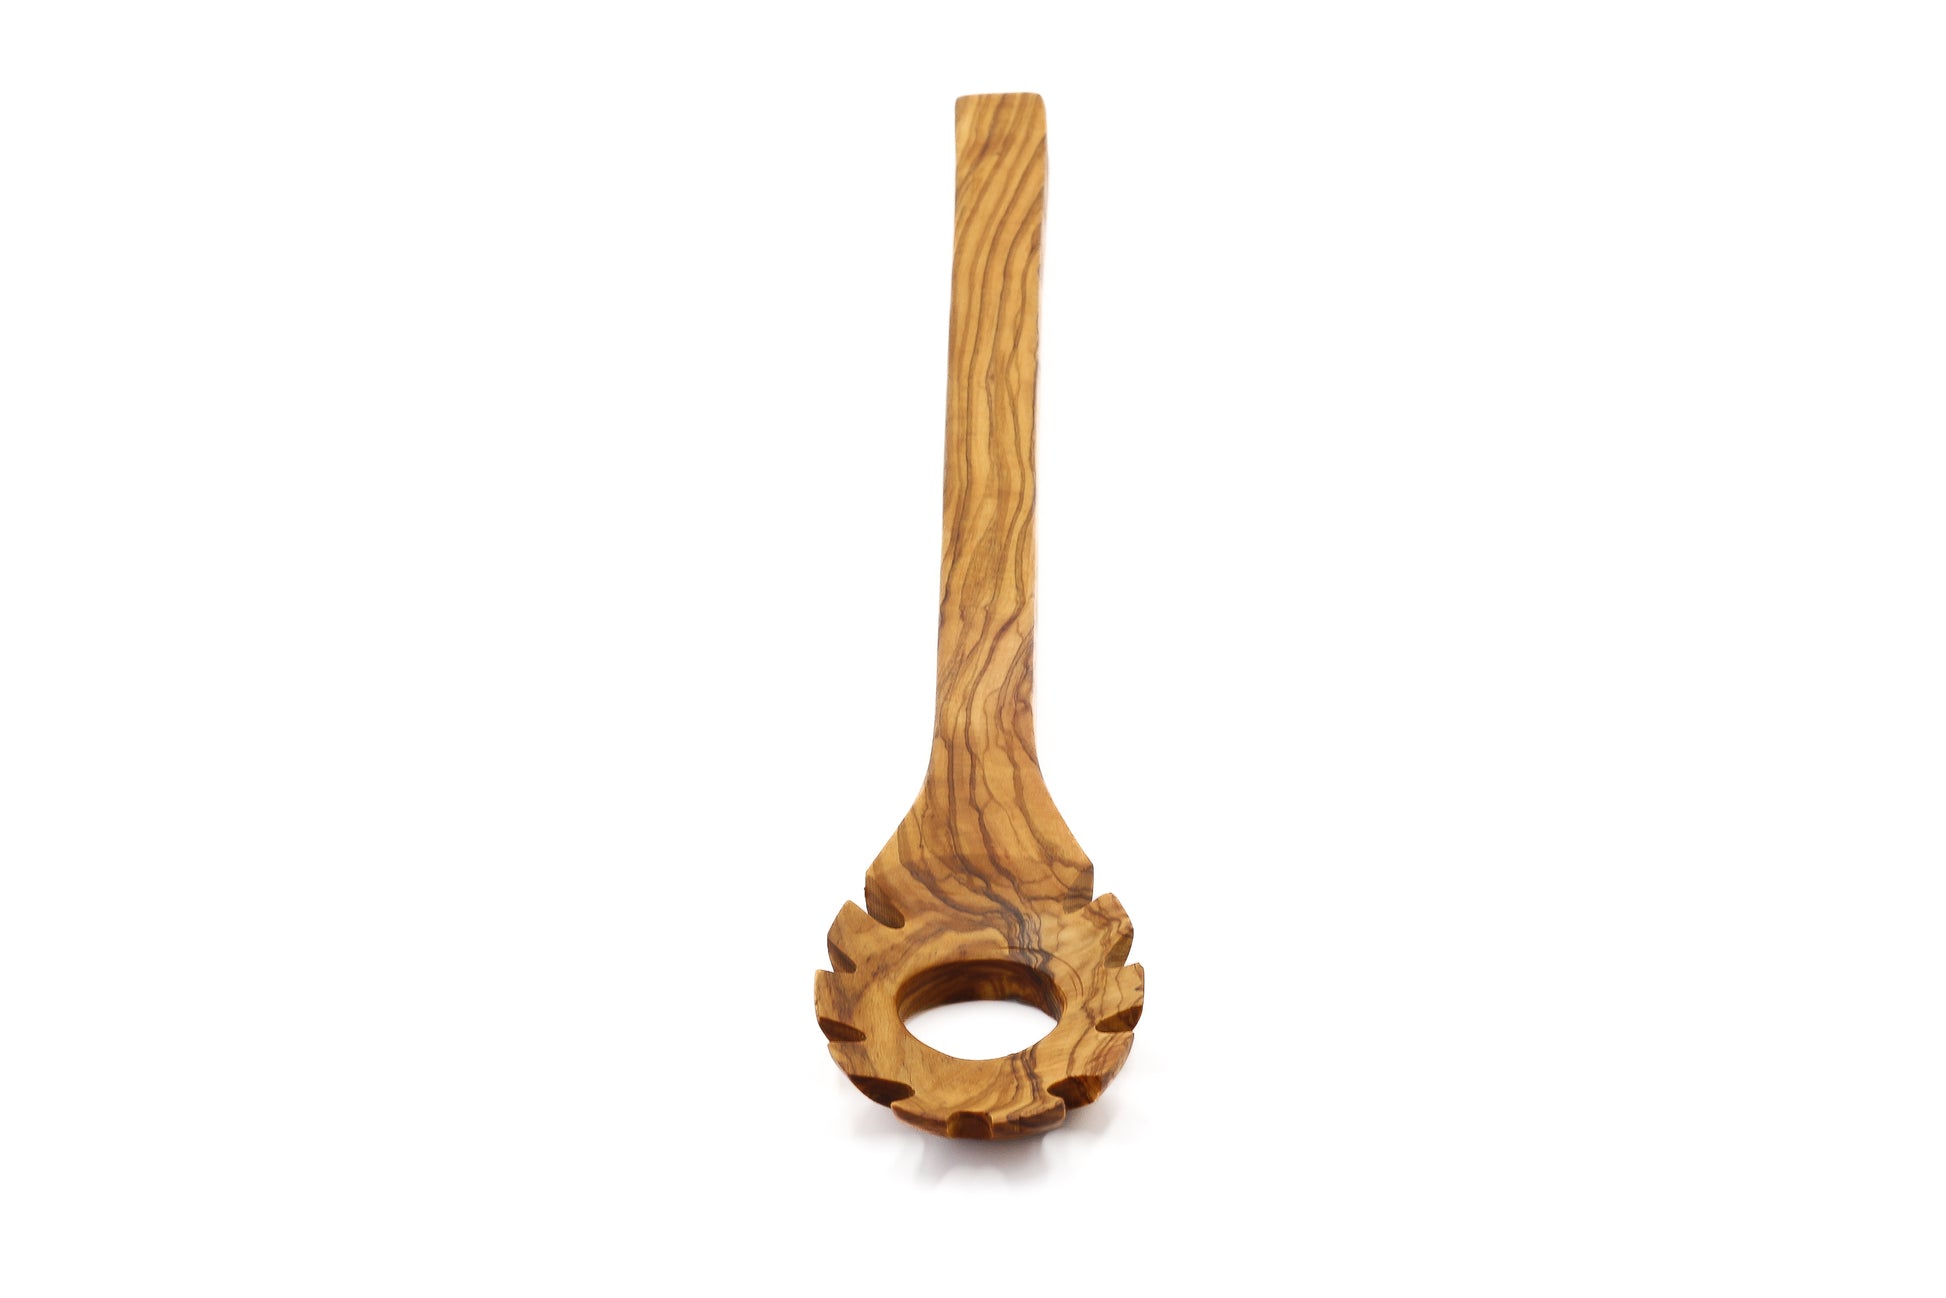 Olive wood forked spoon for serving your favorite pasta